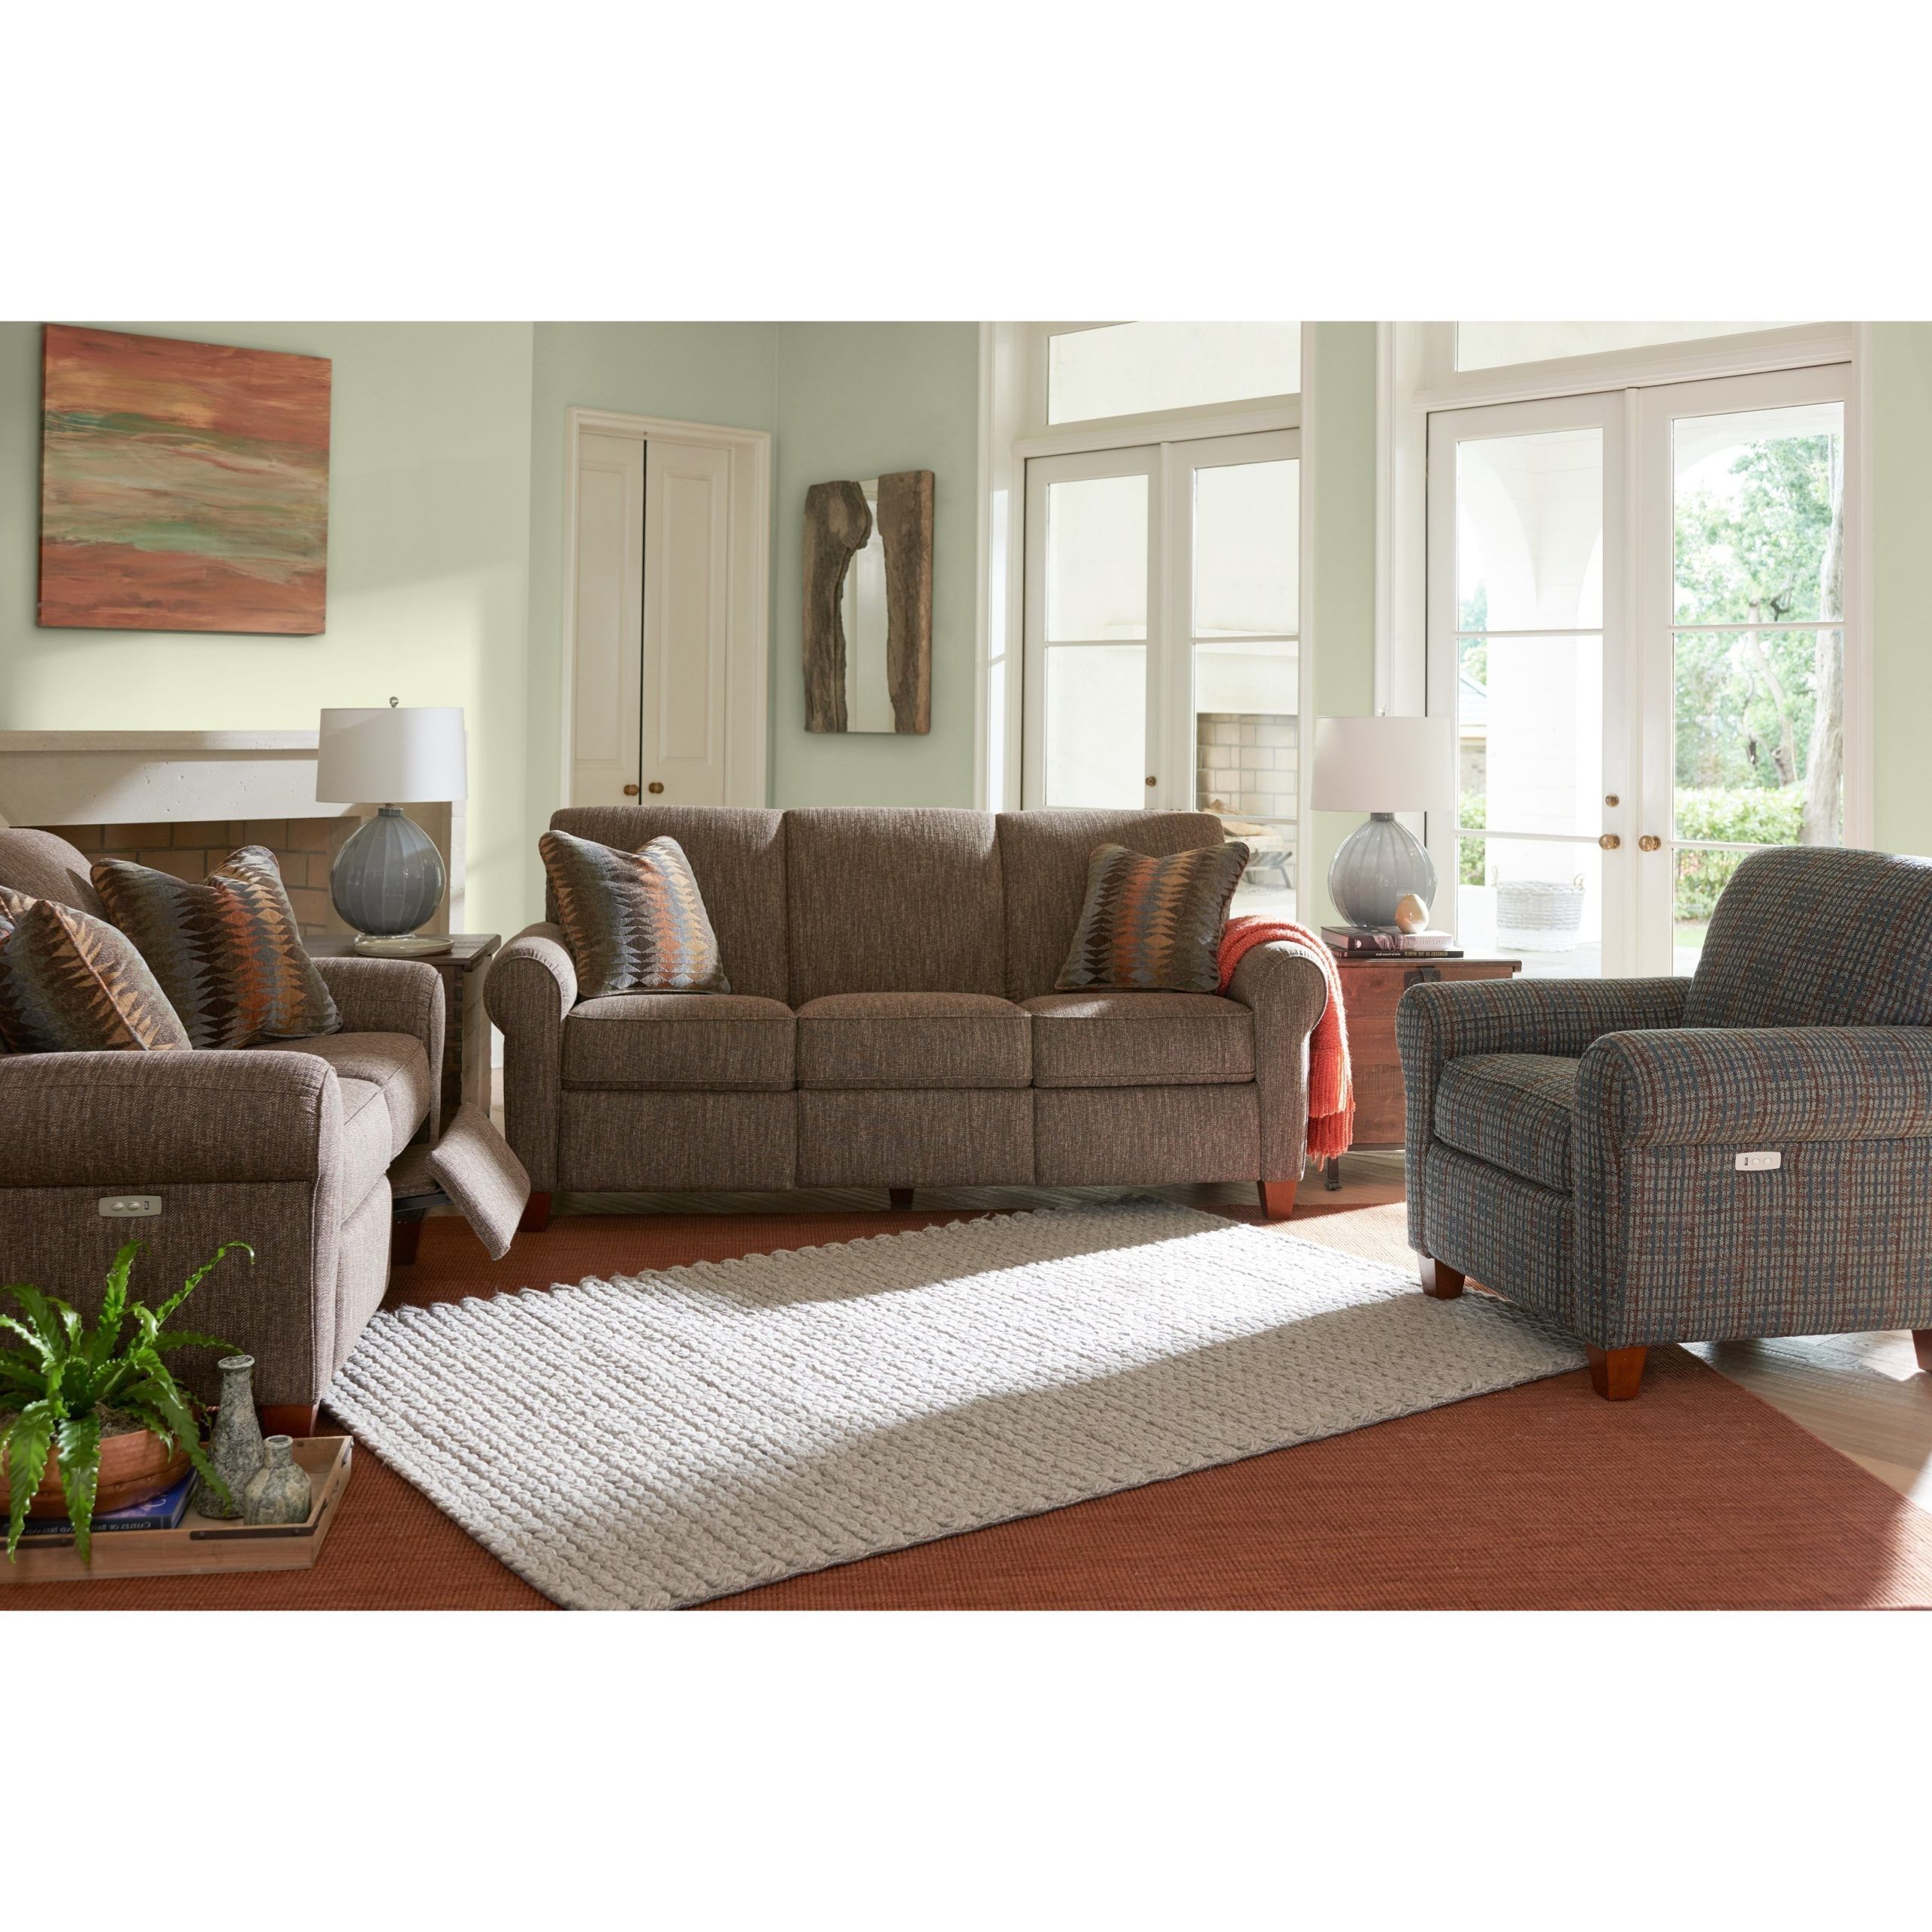 Widely Used 8 Images Bennett Sofa Lazy Boy And Review – Alqu Blog Inside Bennett Power Reclining Sofas (Photo 8 of 15)